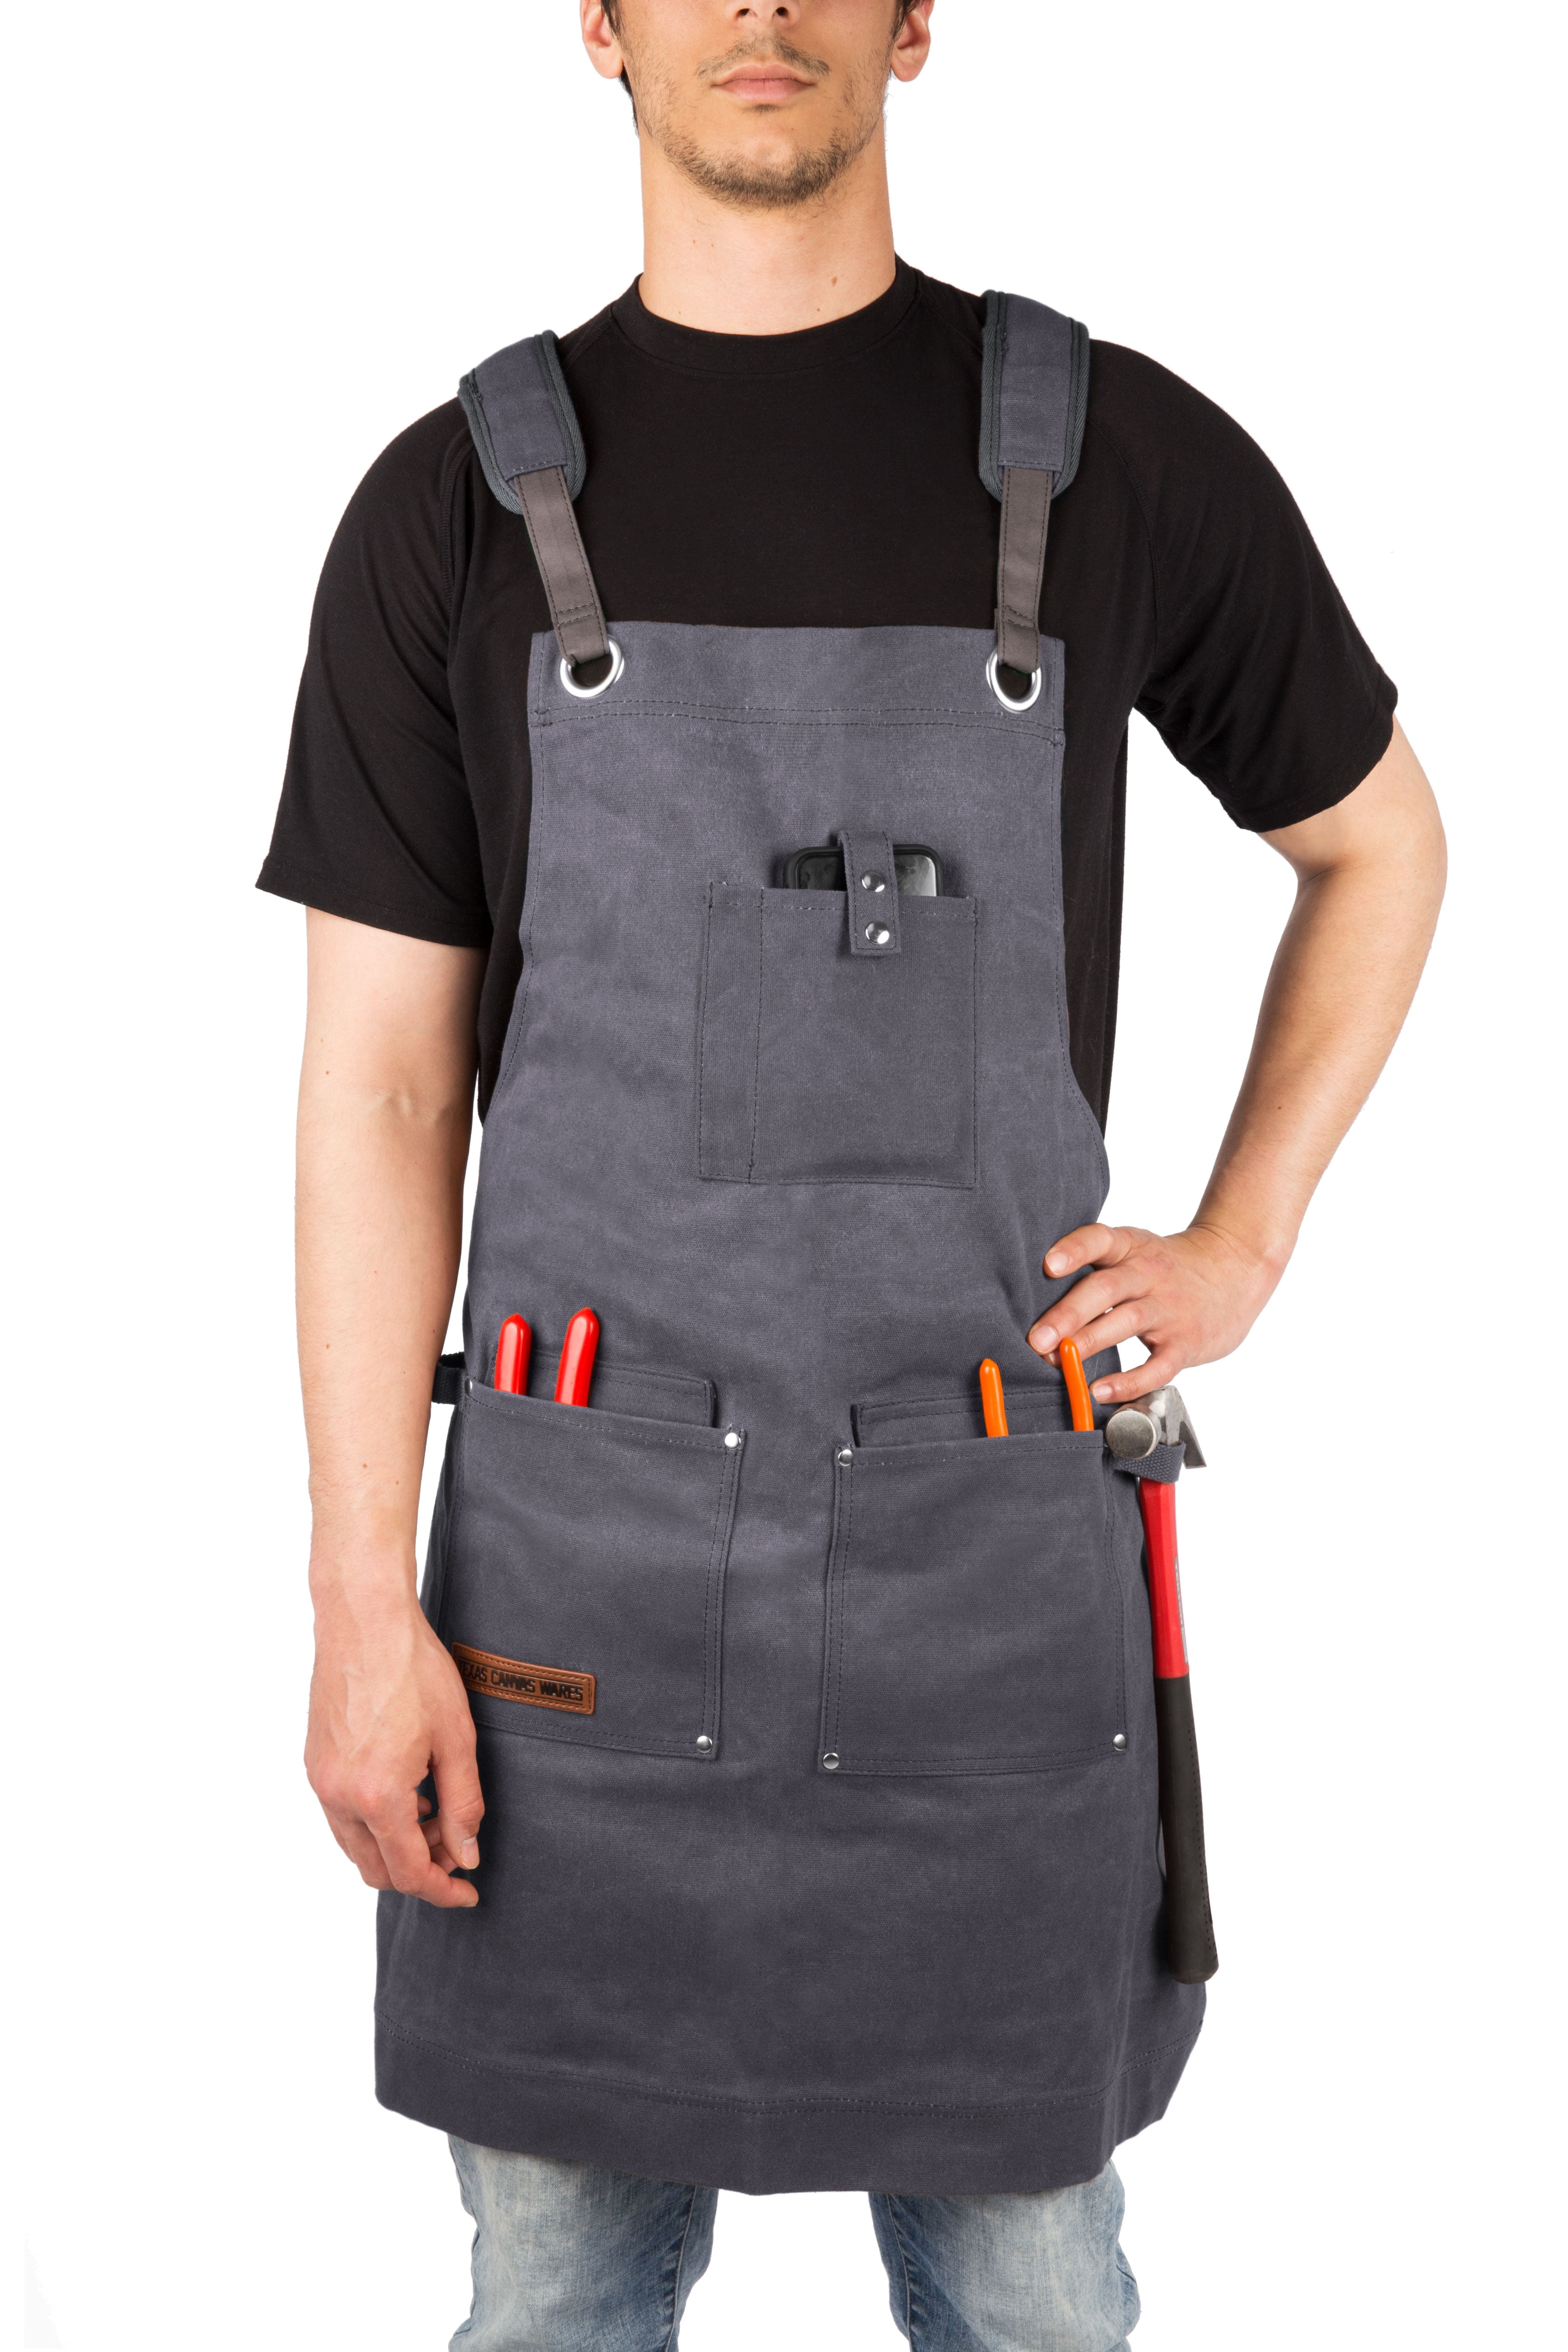 Woodworking Shop Apron Canvas Work Apron with Pockets for Men Women Tool 